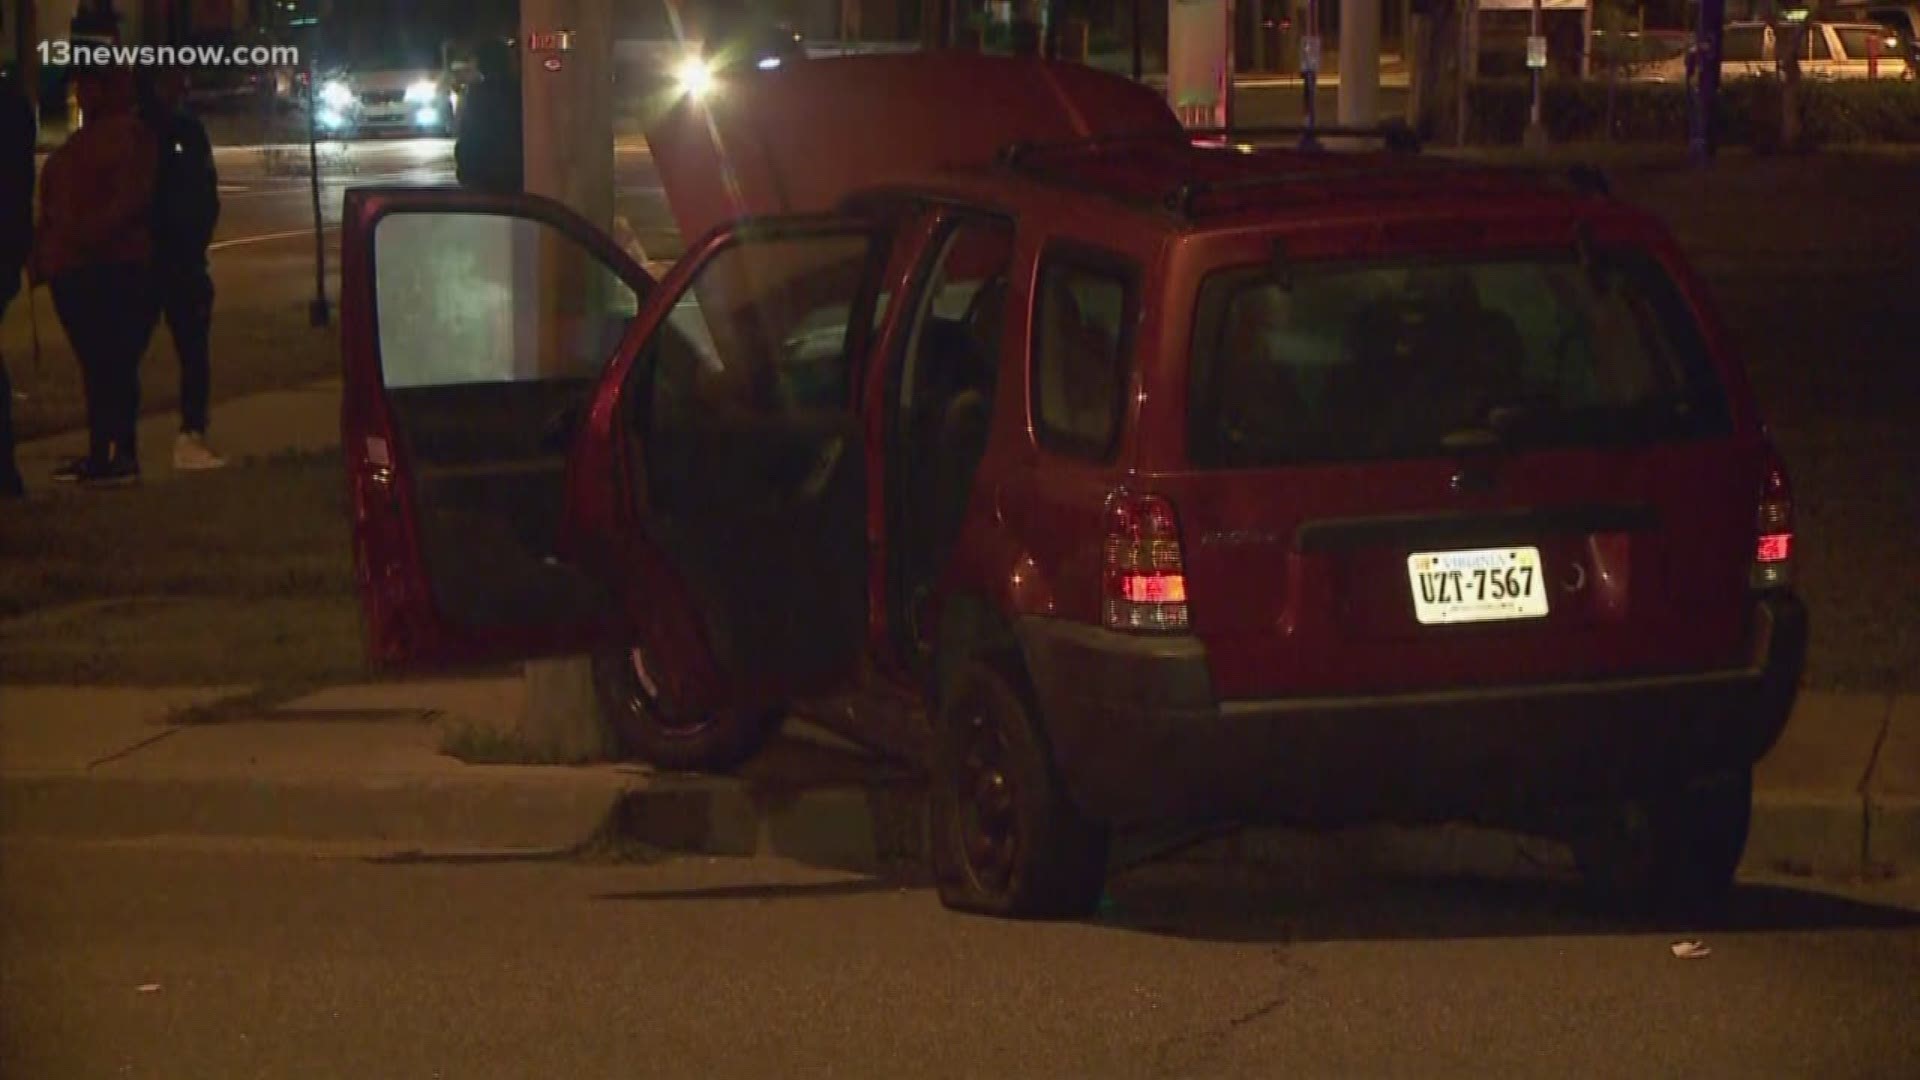 No one was hurt in the overnight crash in Norfolk.